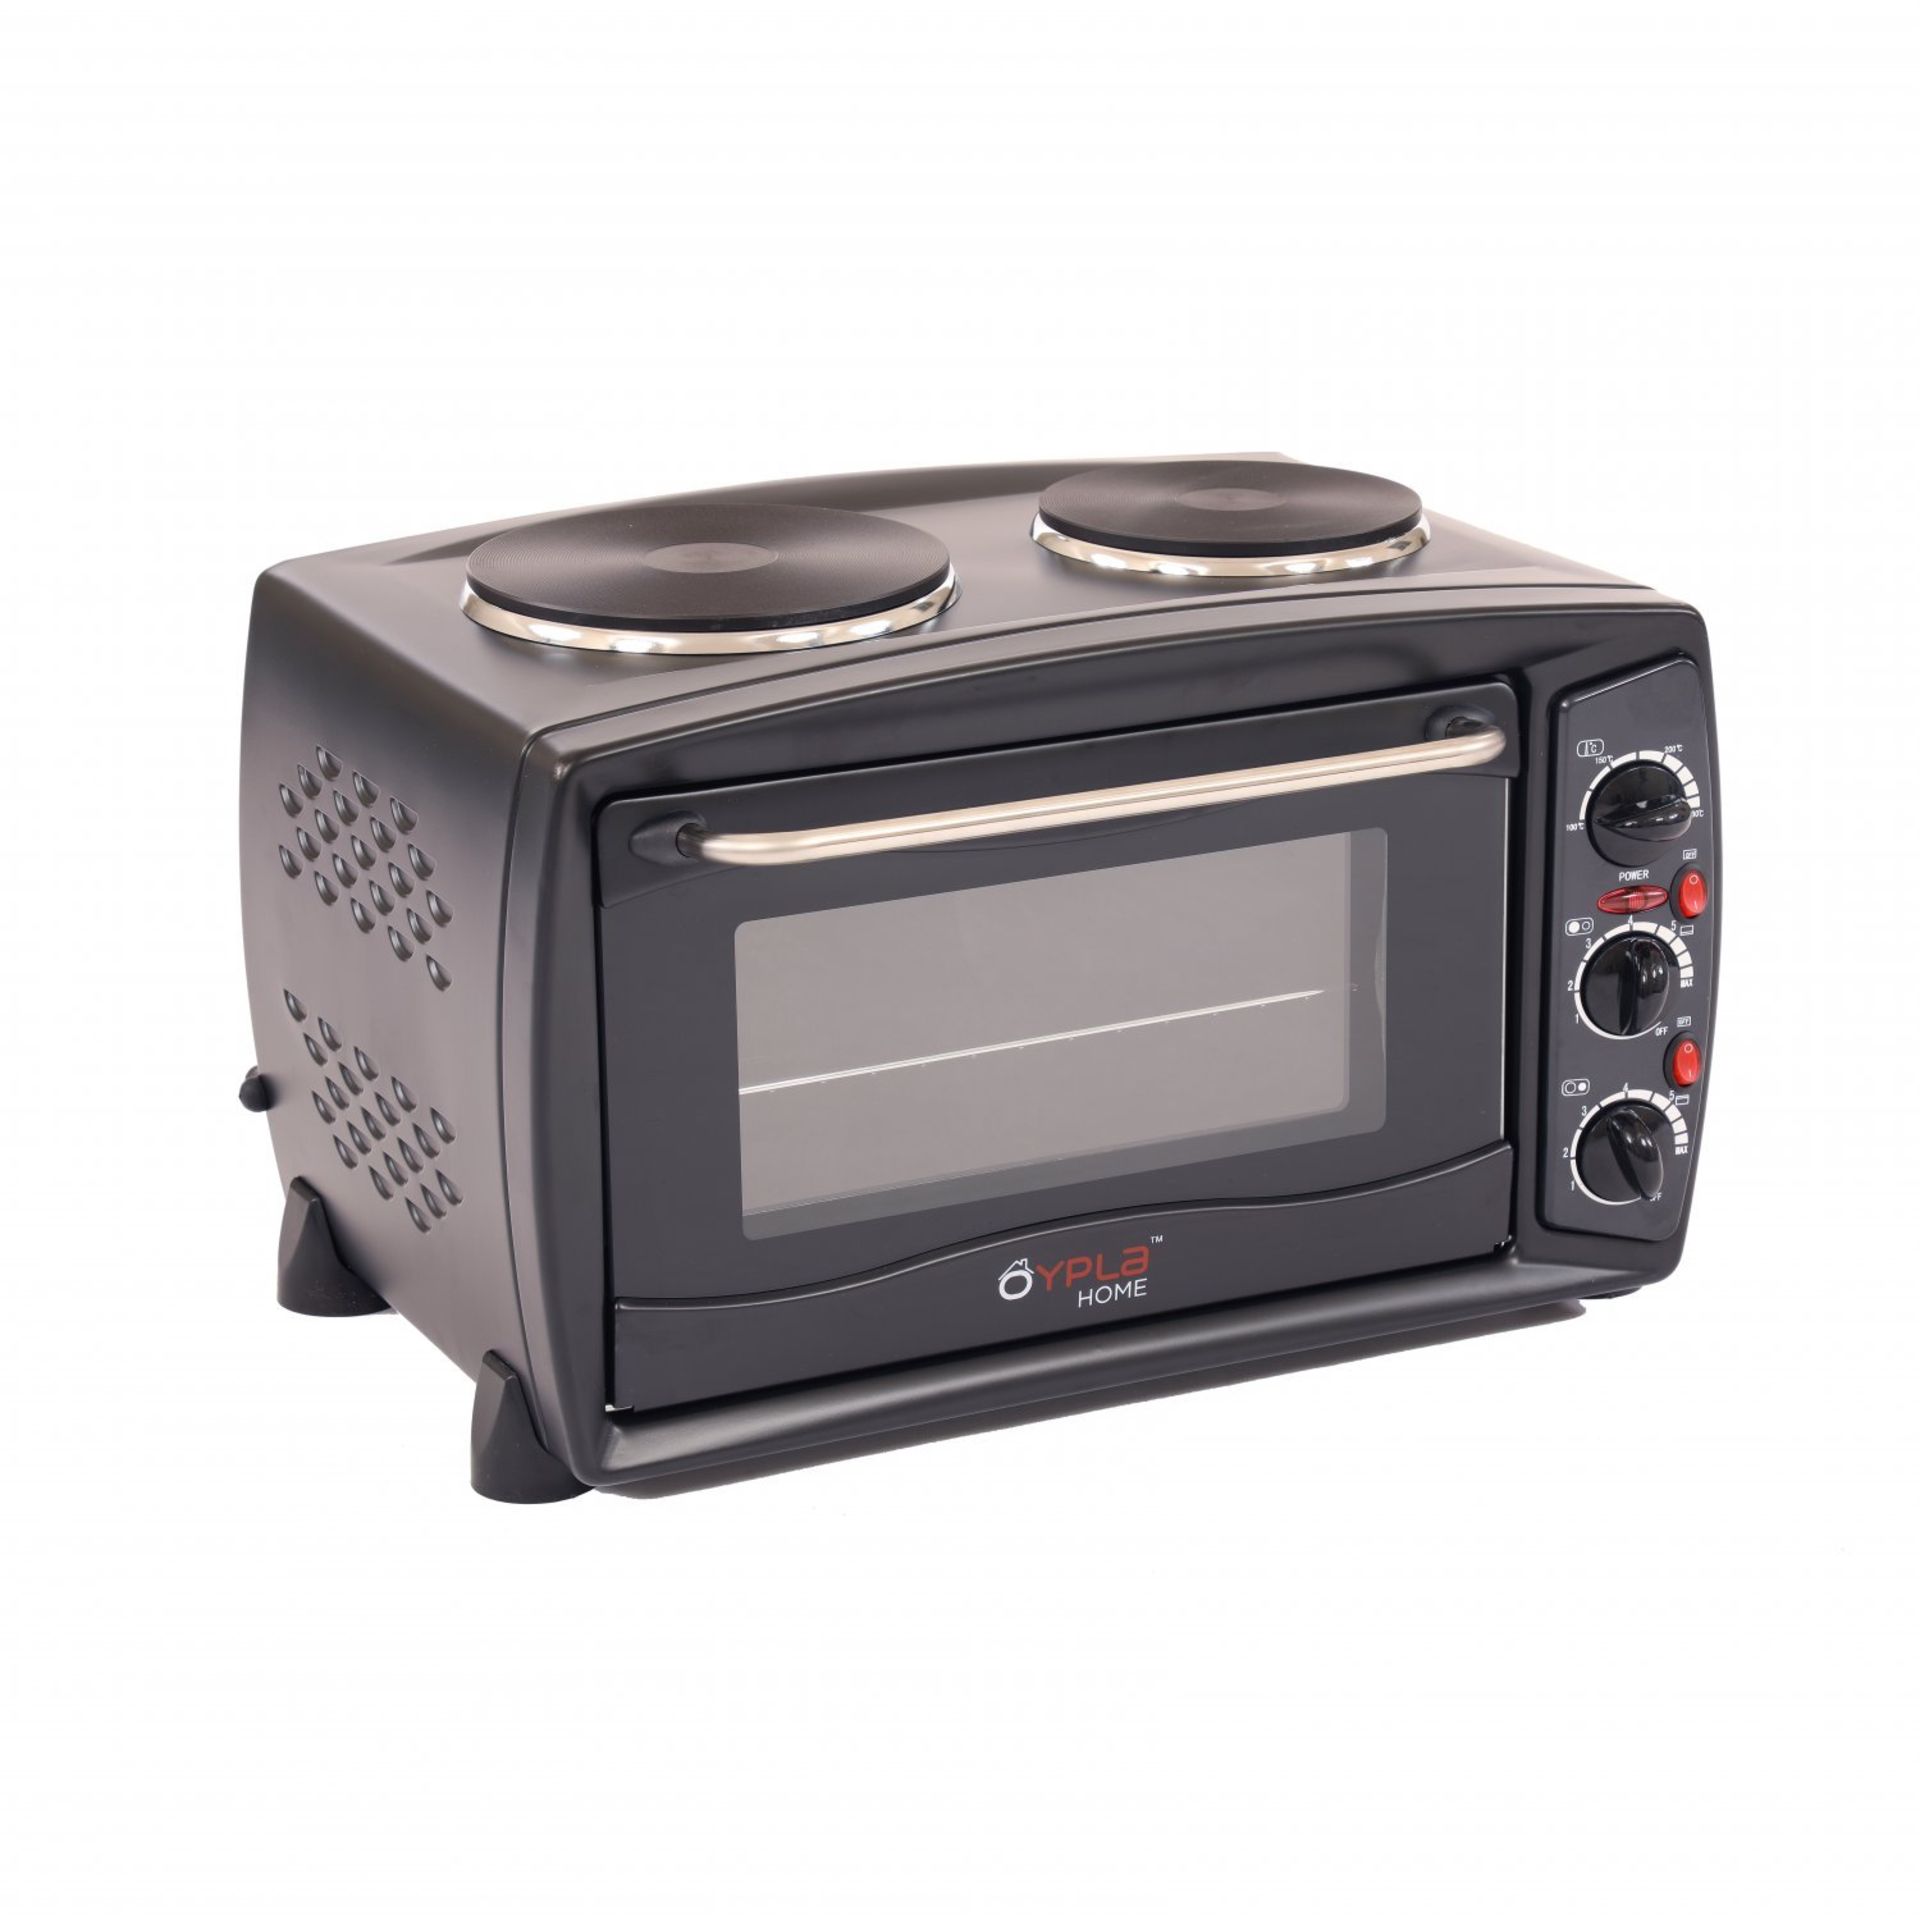 (RU346) Mini Oven c/w Hot Plates And Grill The 26 litre mini oven & grill with double hob ... - Image 2 of 2